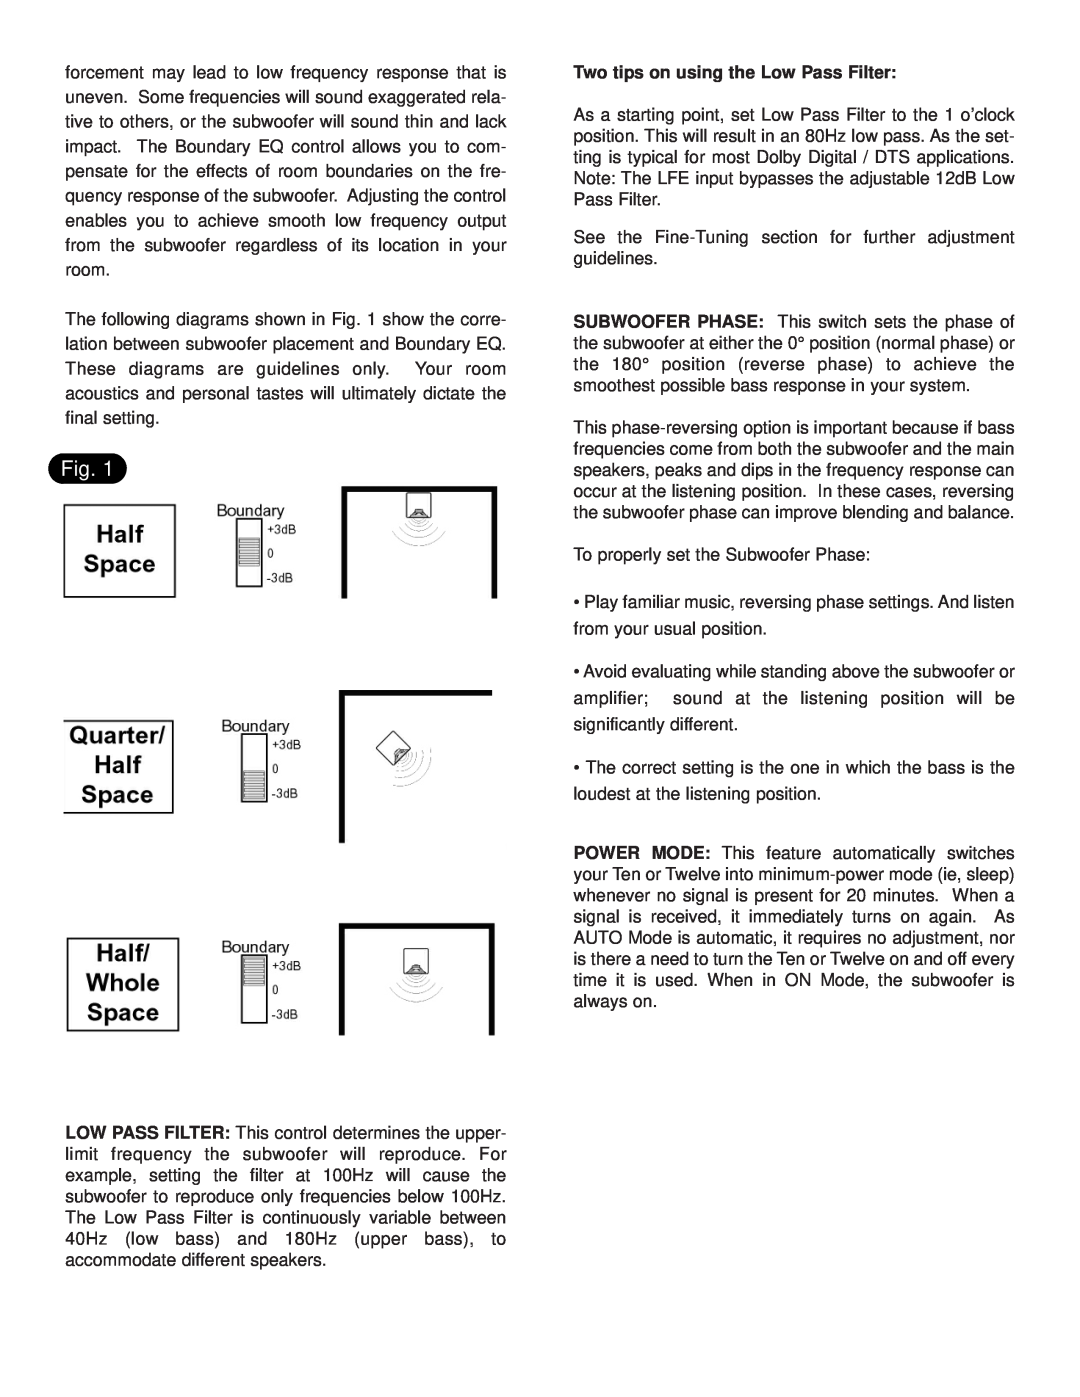 NHT Powered Subwoofers owner manual Two tips on using the Low Pass Filter 